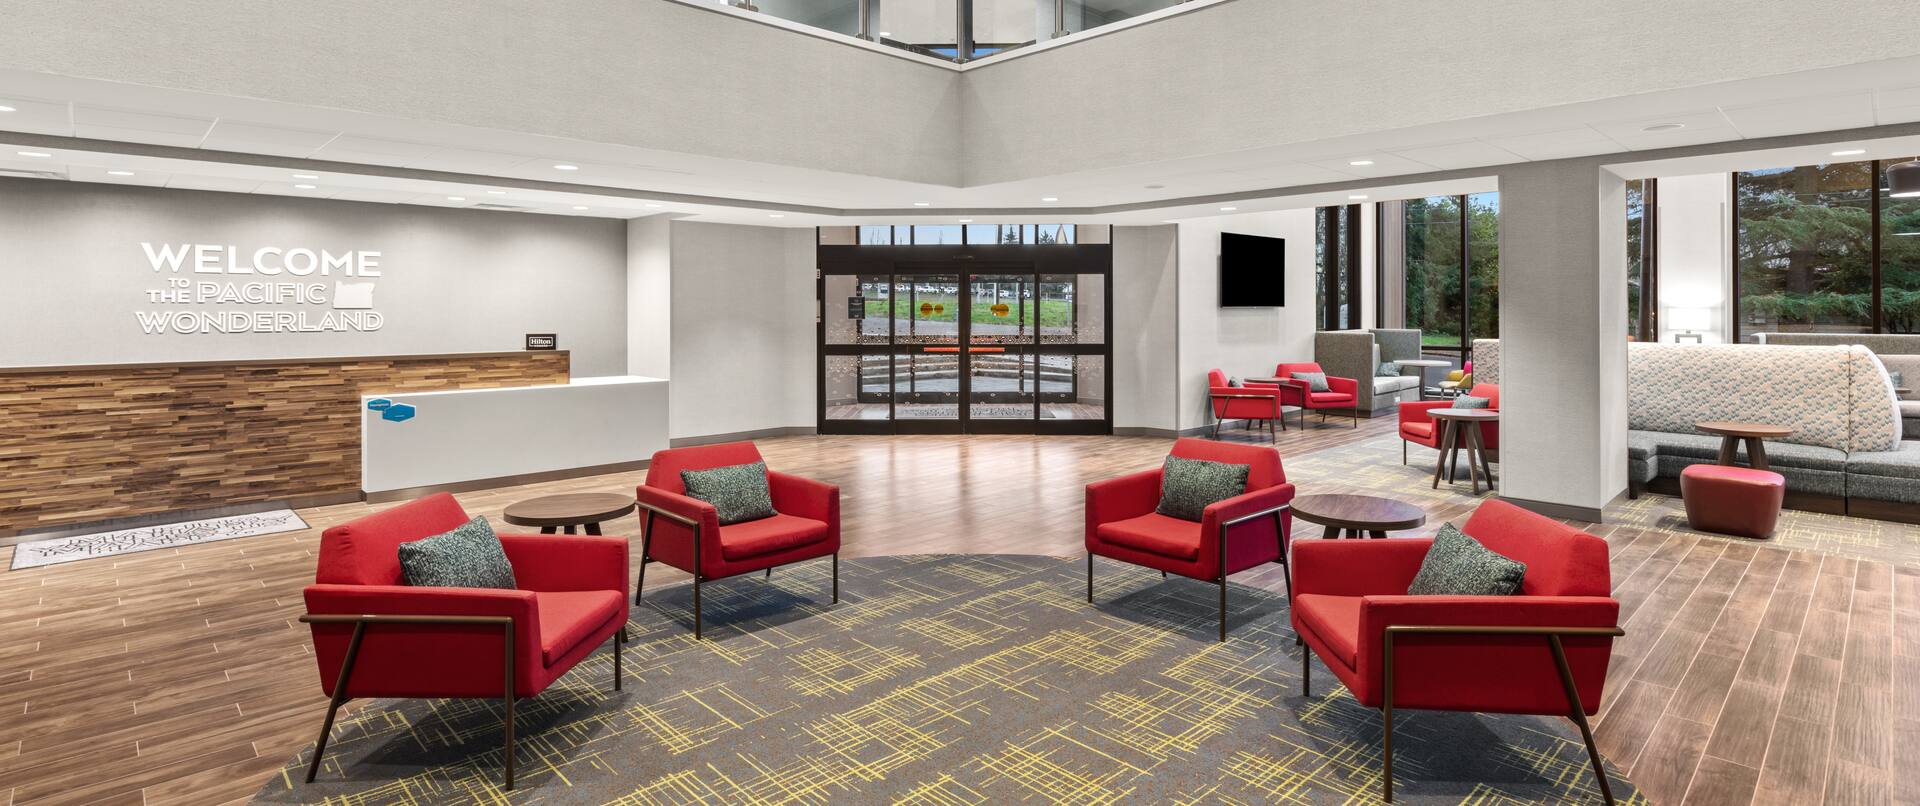 Lobby Seating Area With Front Desk